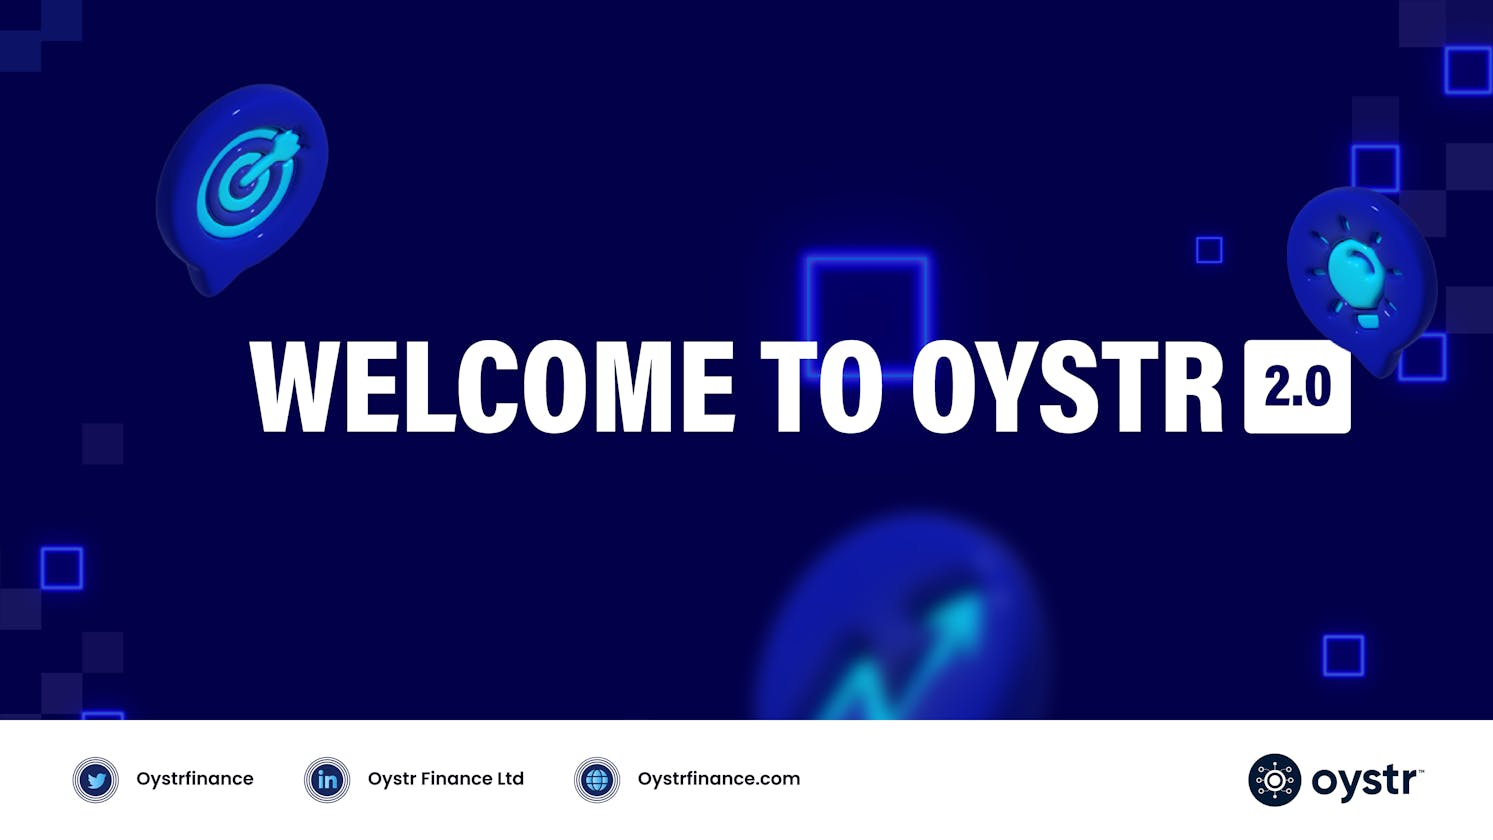 Welcome to Oystr 2.0: What’s new?